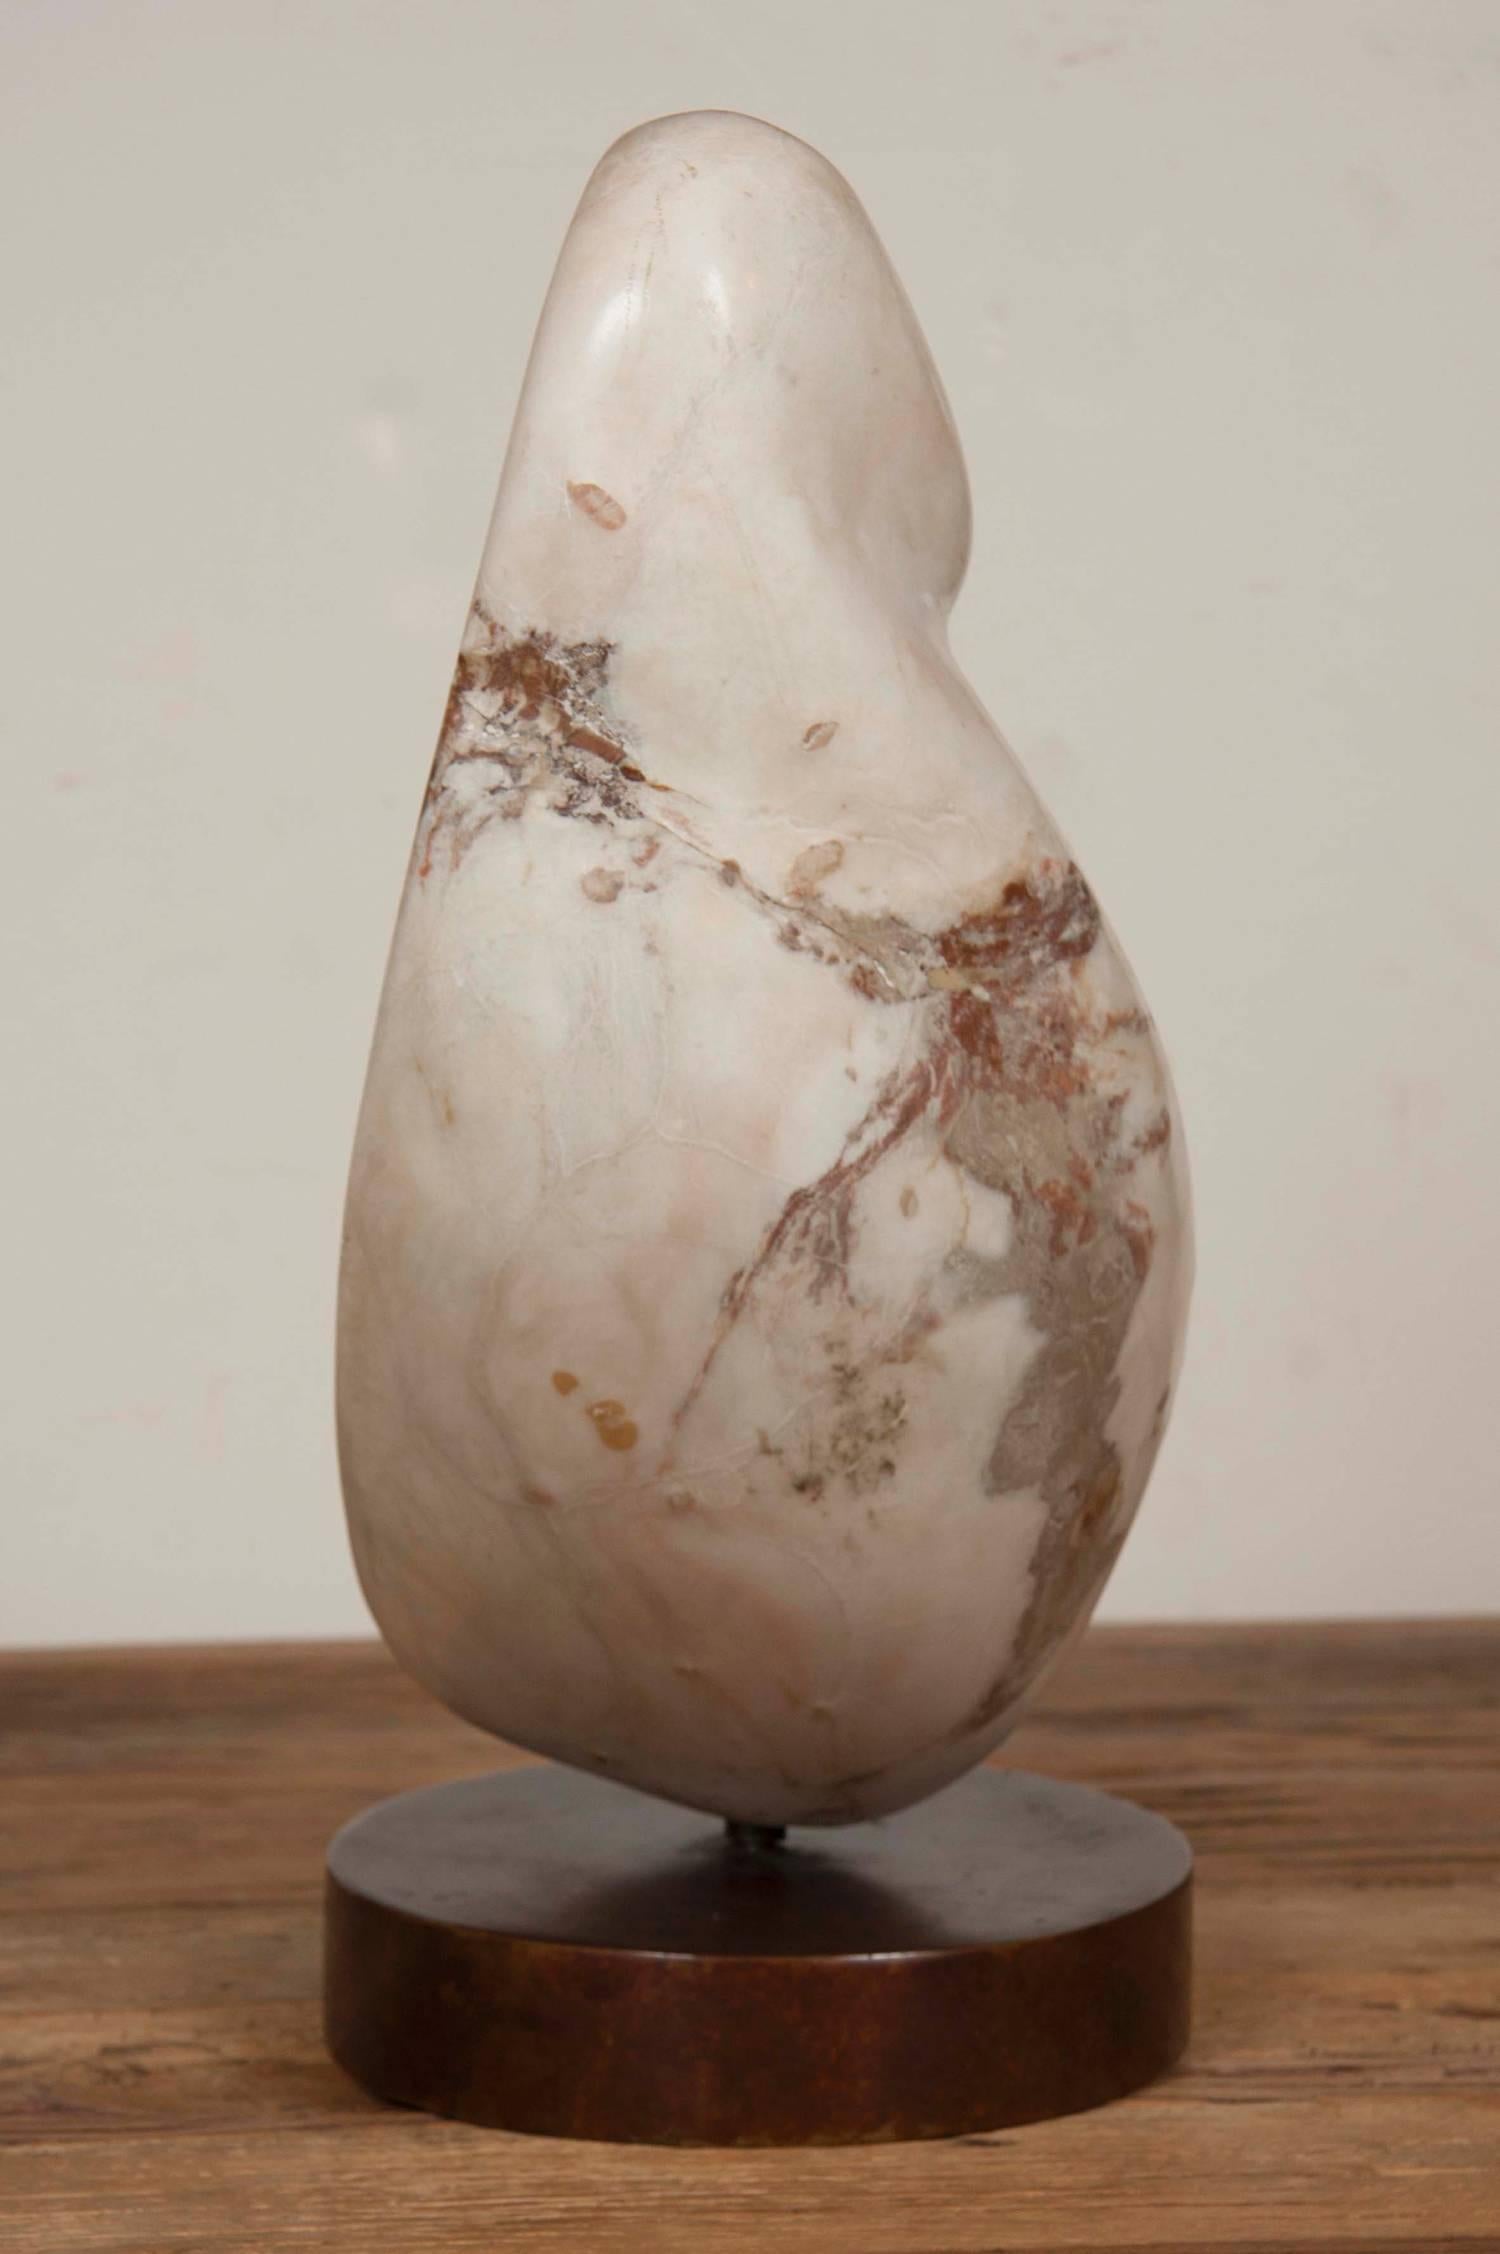 A marble sculpture by Ann Harris, Canadian.
Untitled.
Born 1928.
Signed on base.

Collections: La Citadelle, Quebec; Official Residence of the Prime Minister, 24 Sussex Drive, Ottawa; Albright-Knox Art Gallery, Buffalo, NY; among others.